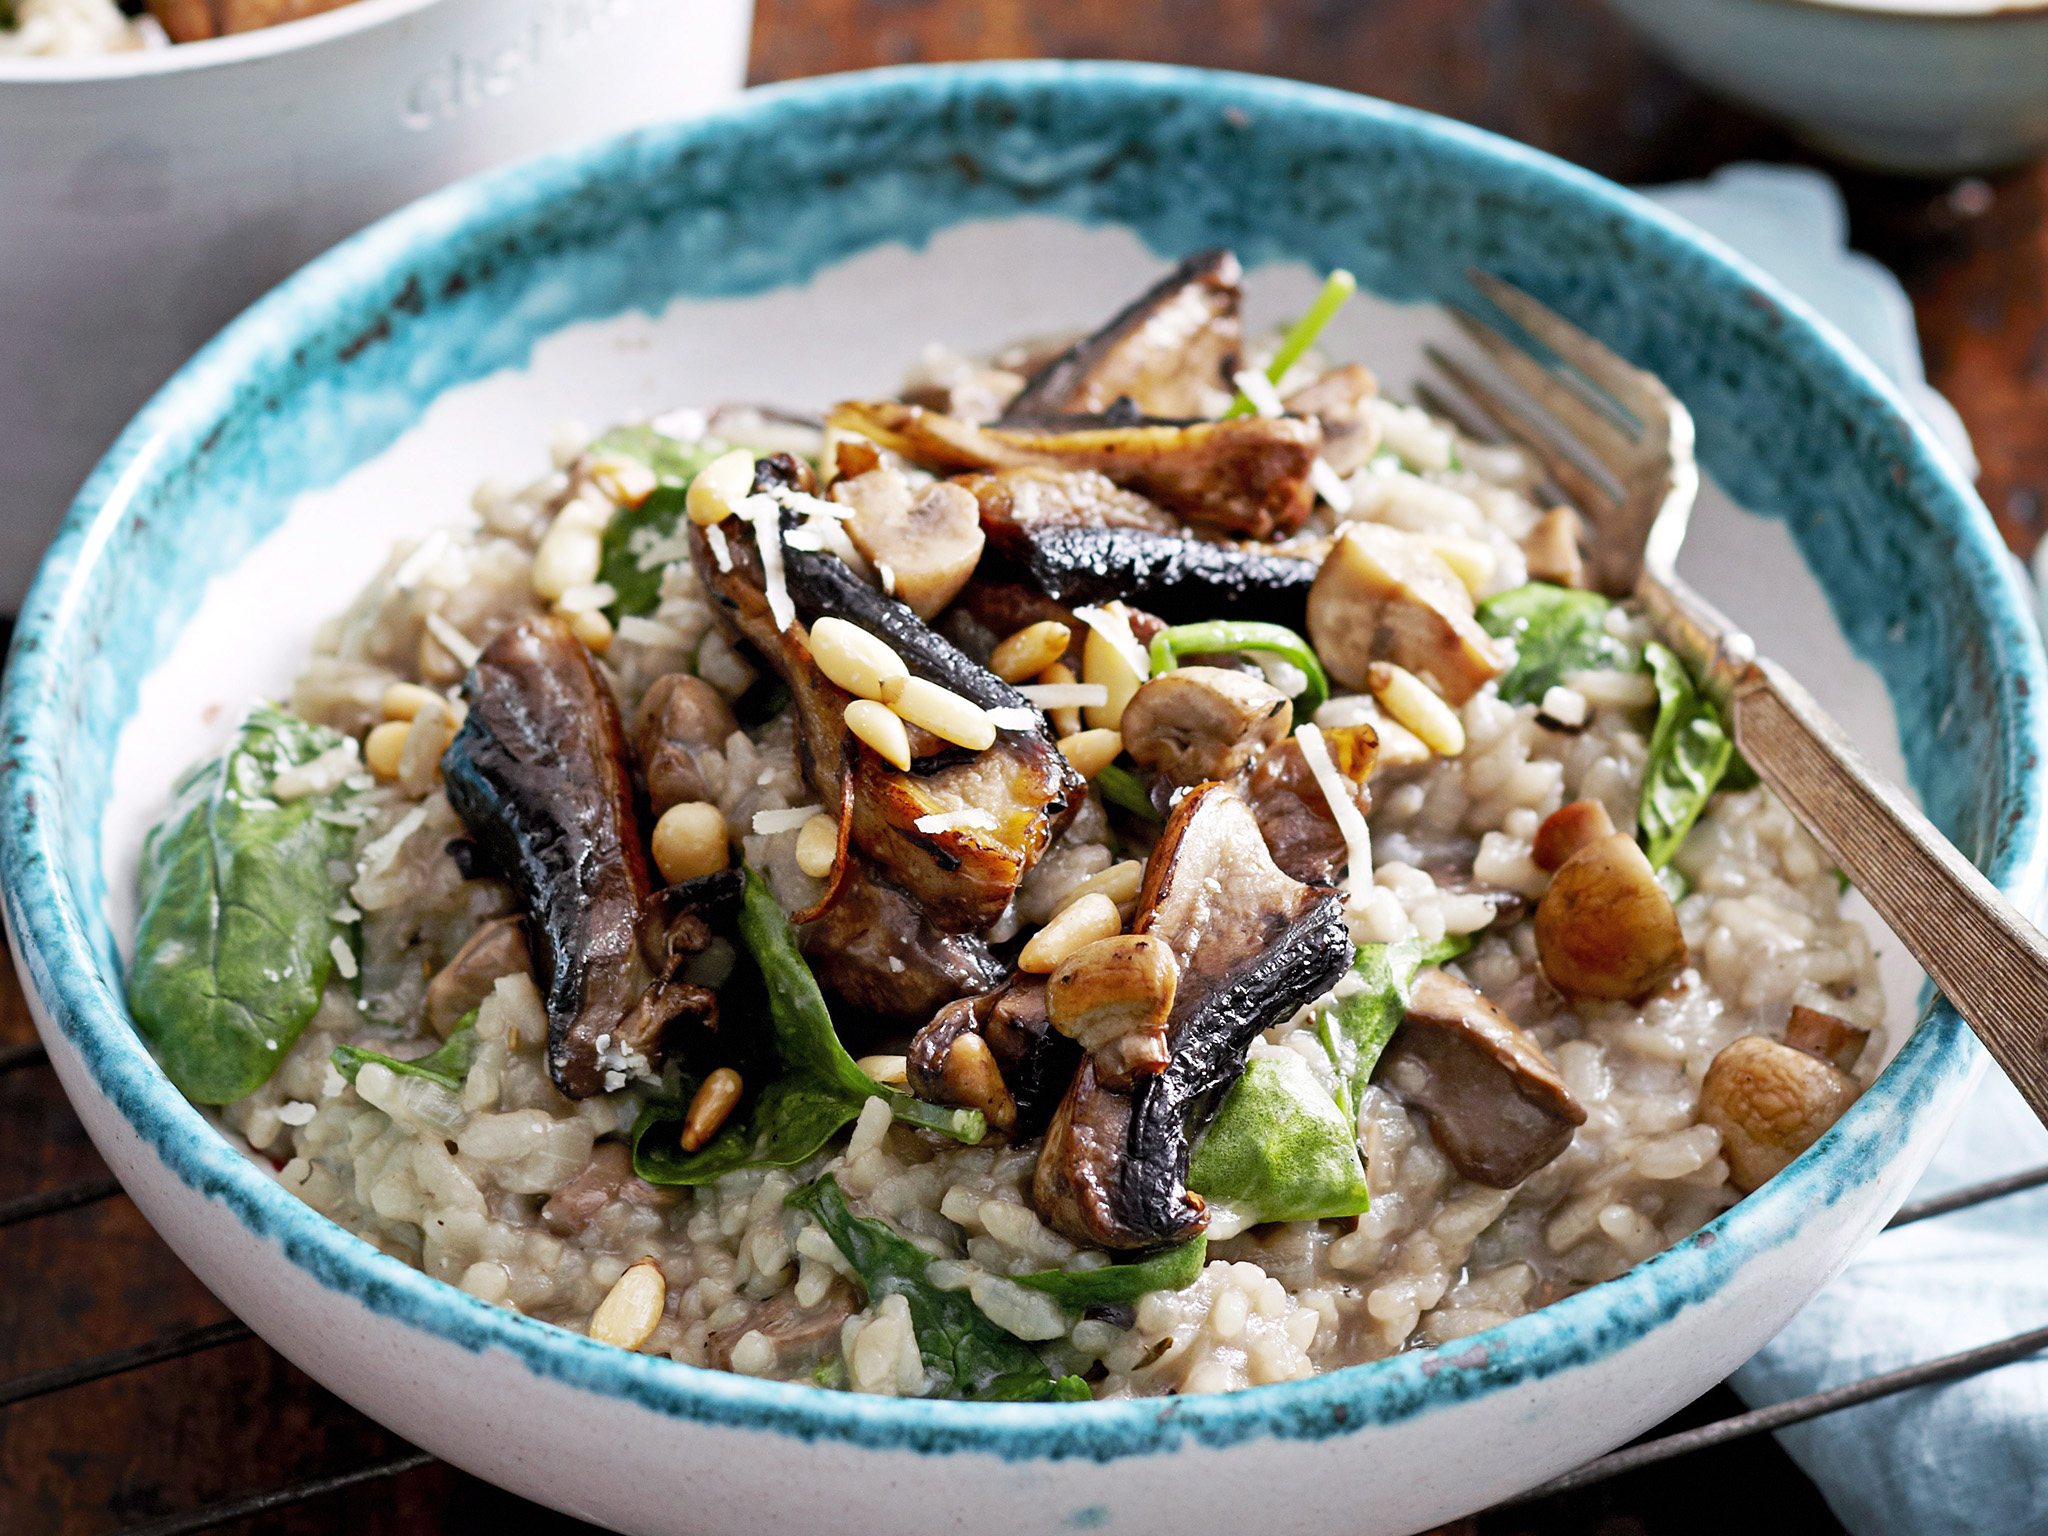 Oven-baked mushroom and spinach risotto